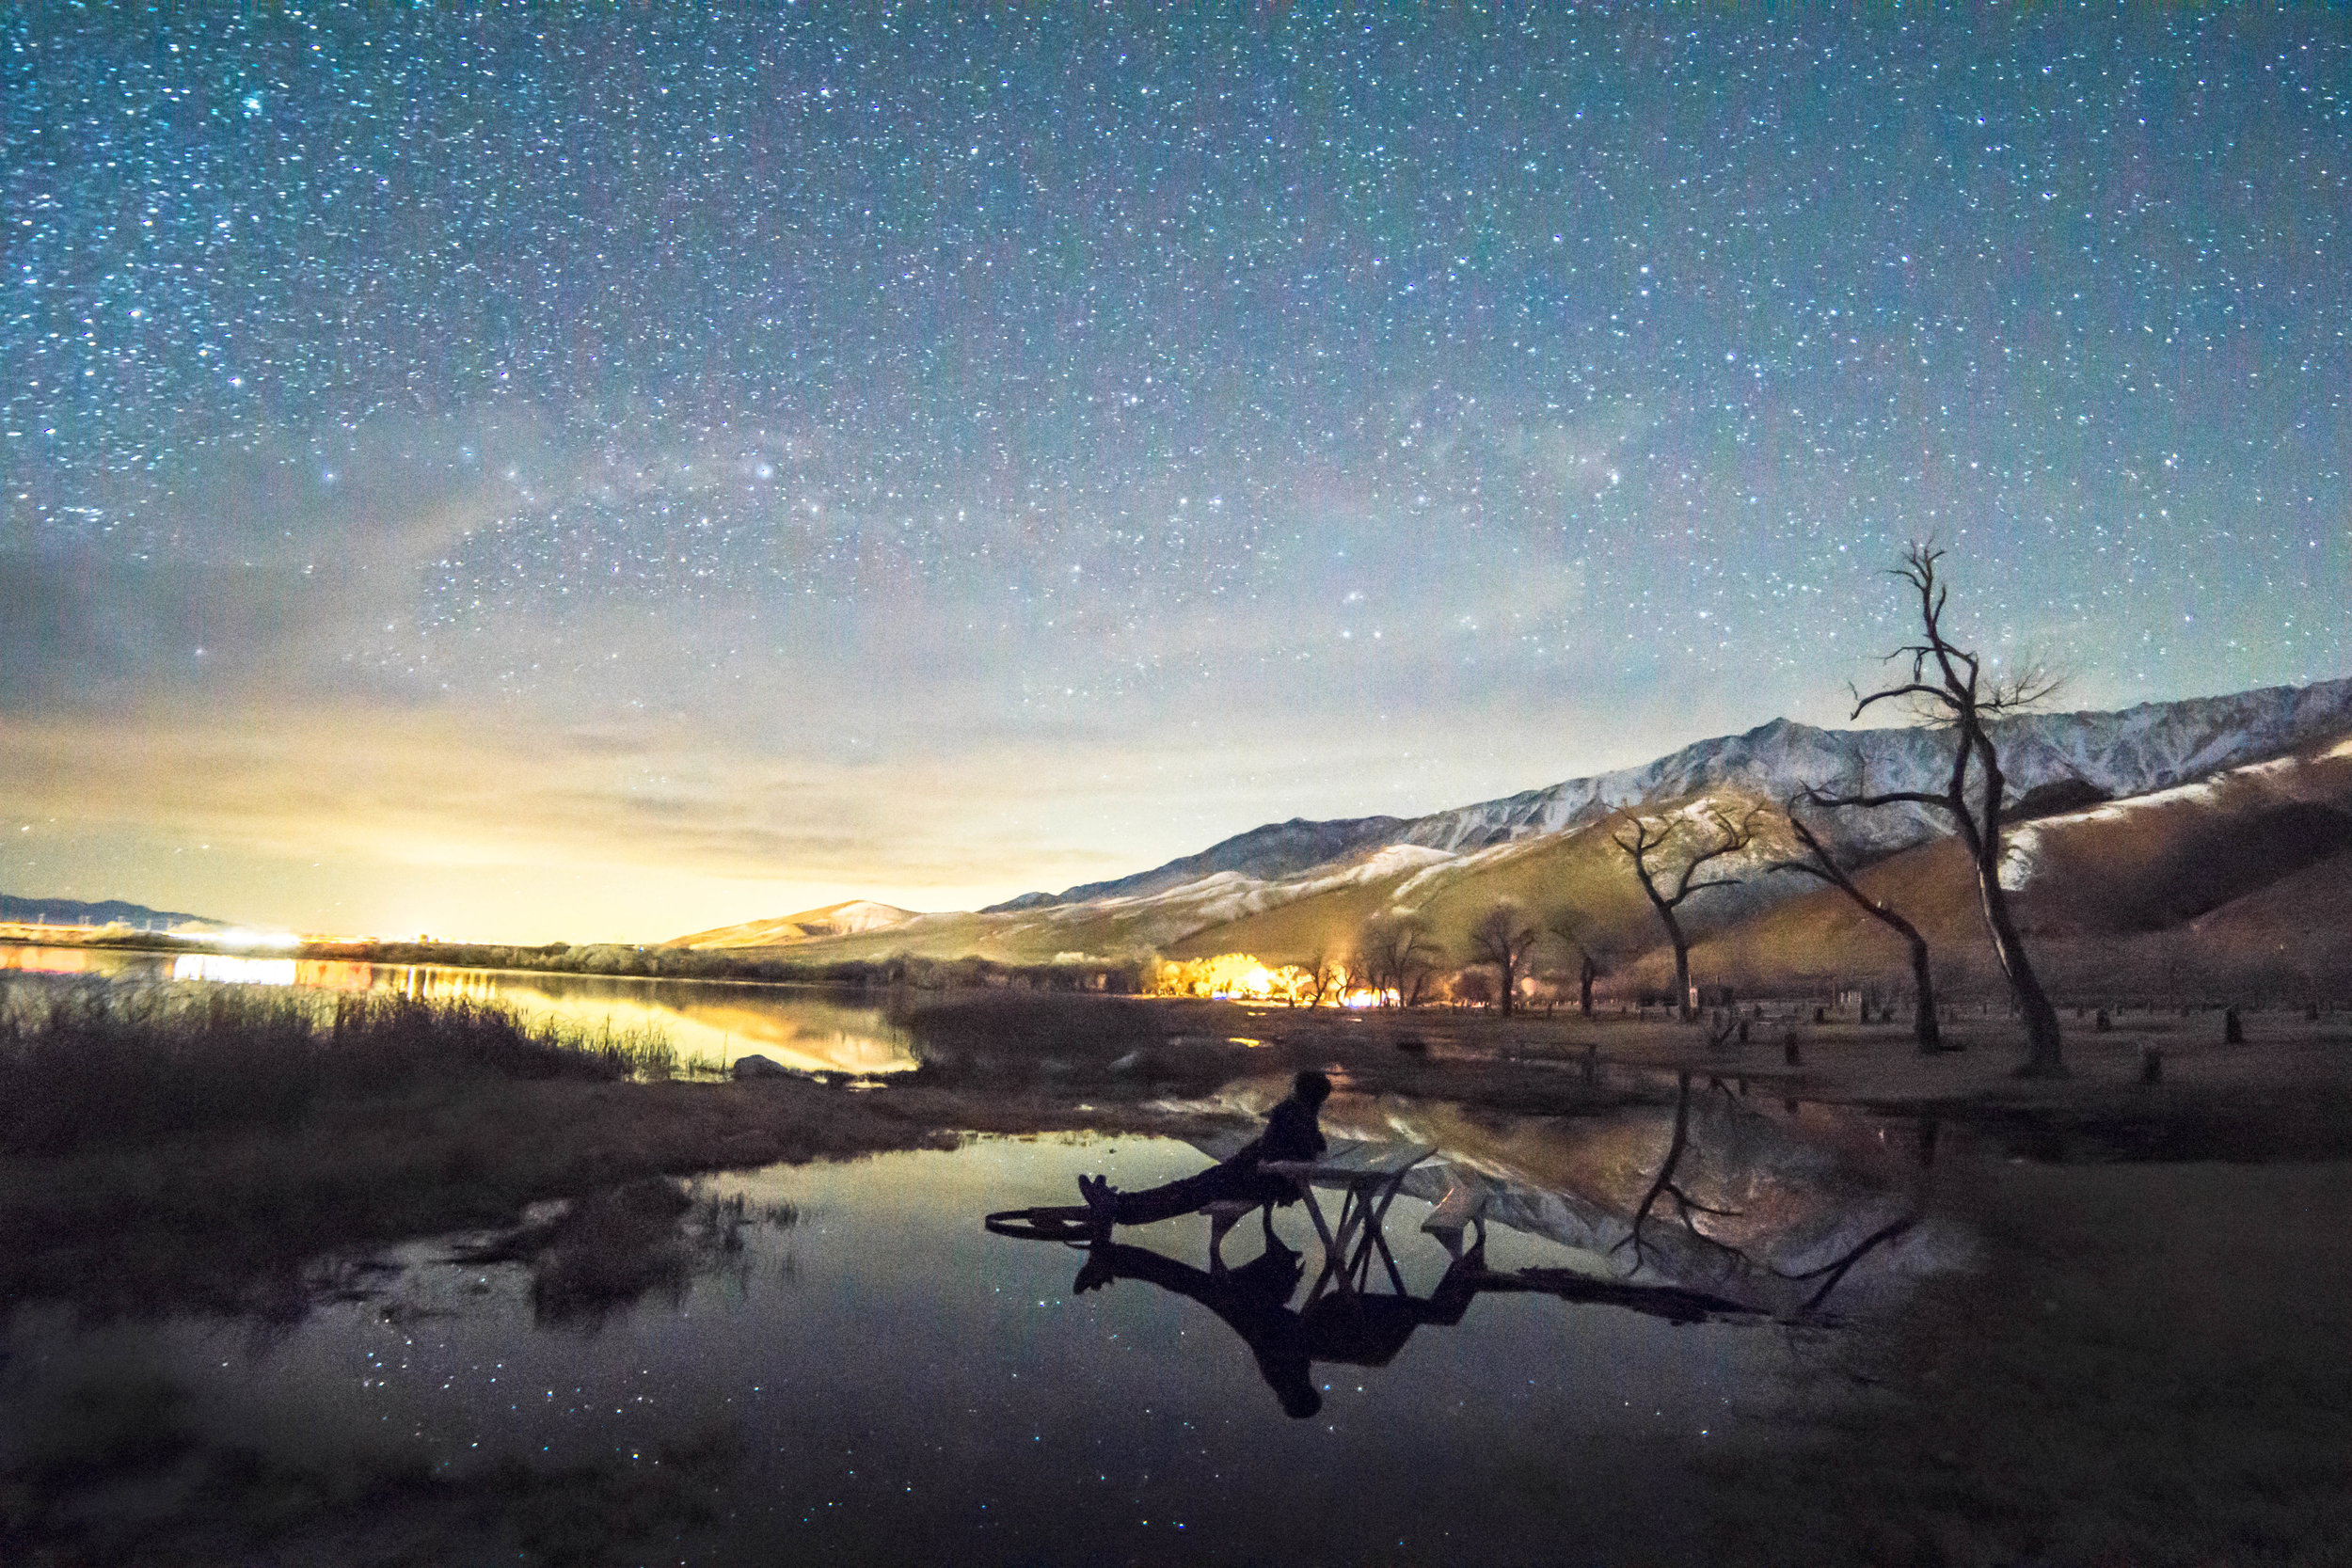 Now out of firewood, we set our sites to stargazing amid the mesmerizing reflections of the flood pond.